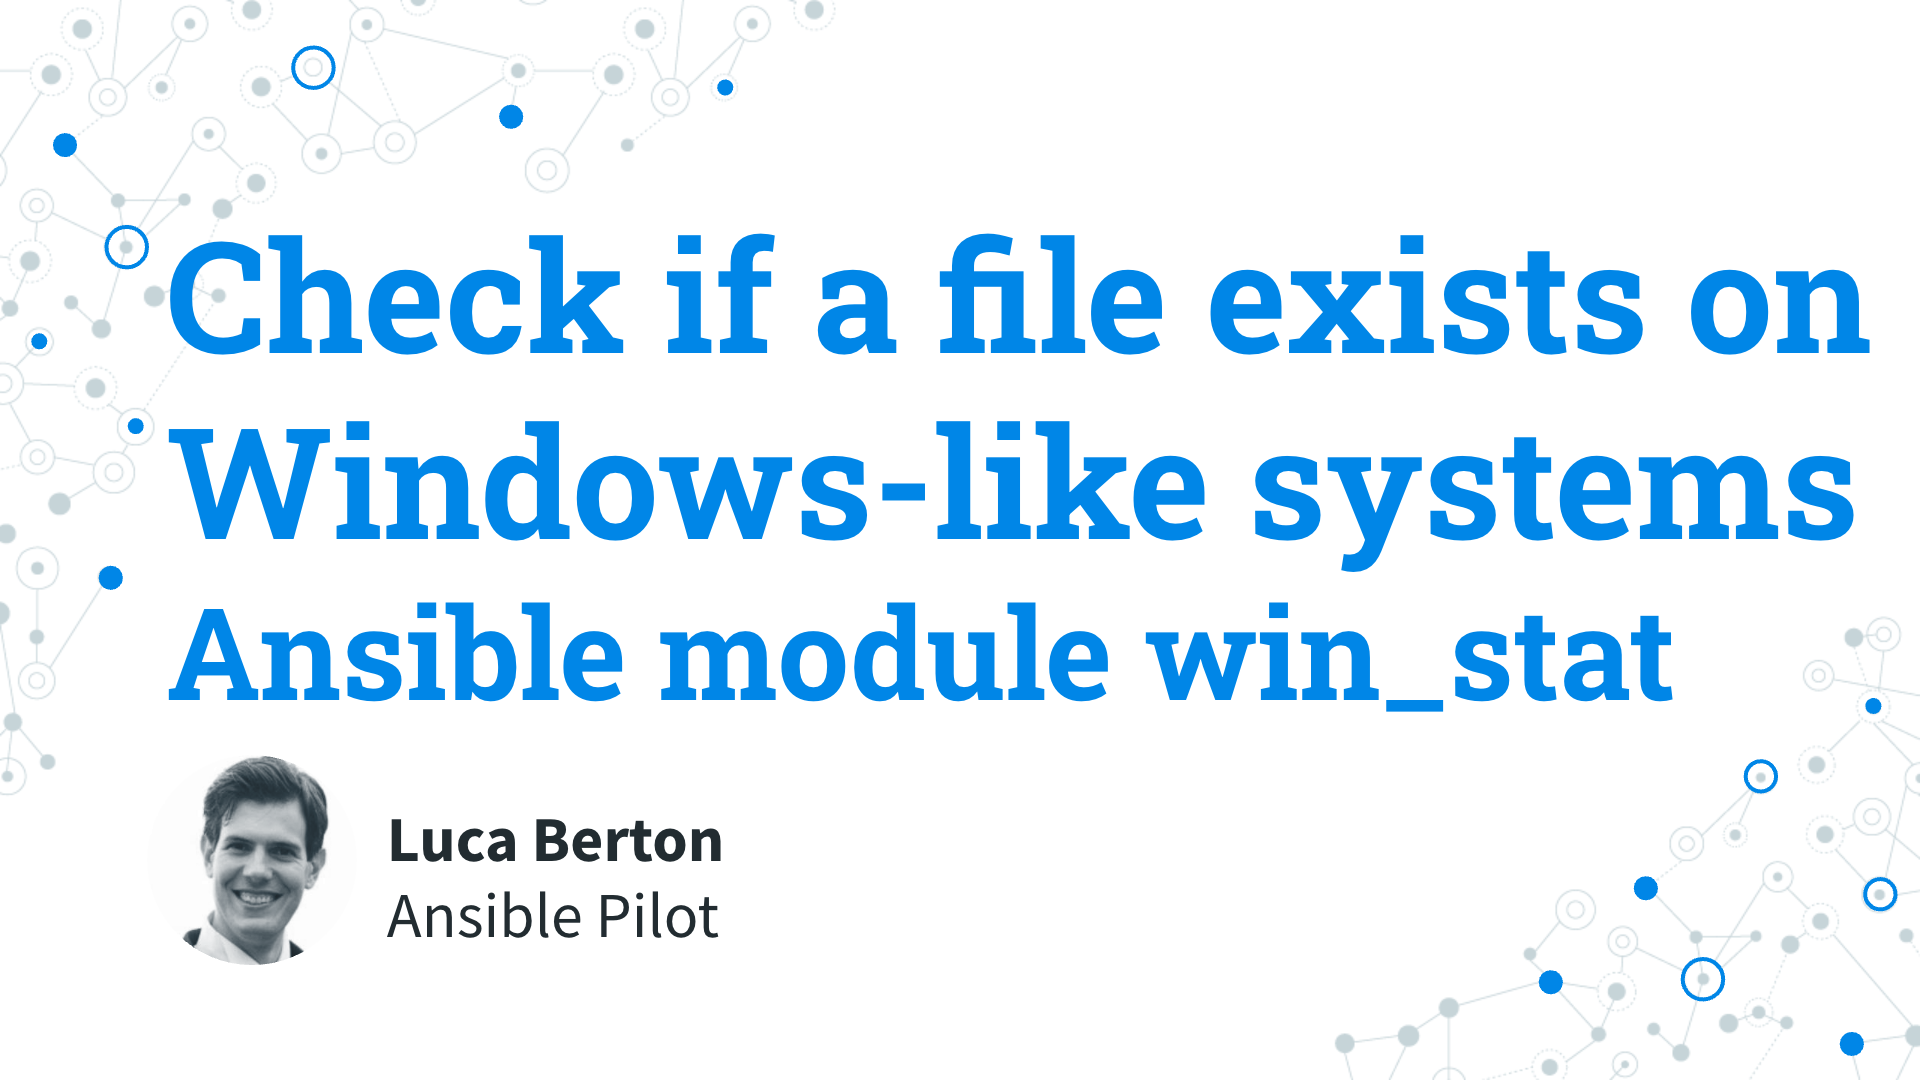 Check if a file exists on Windows-like systems - Ansible module win_stat